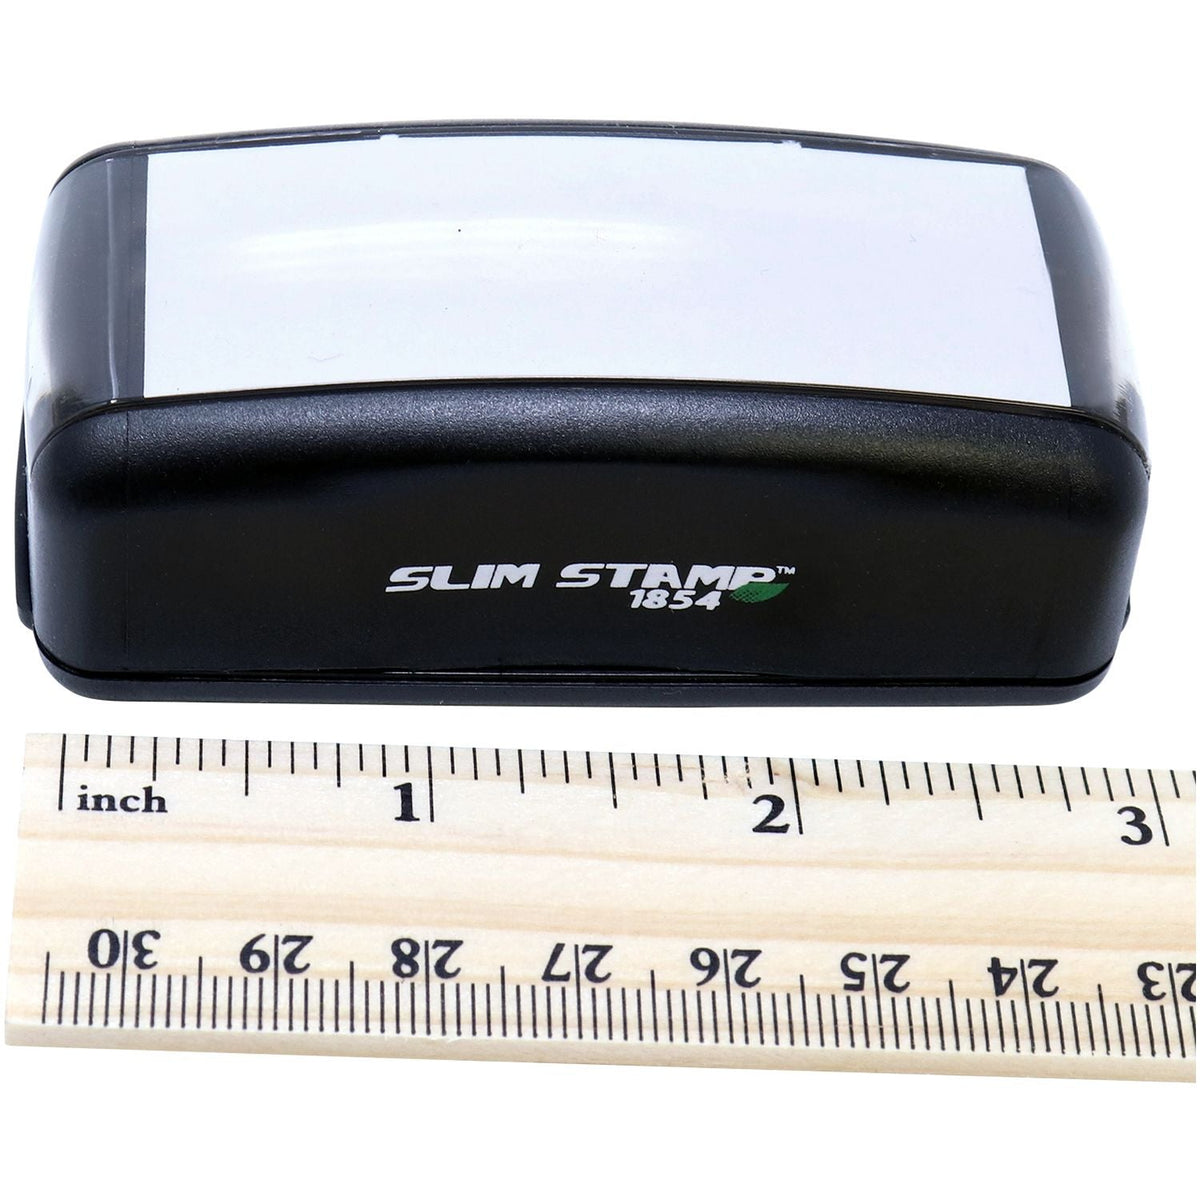 Measurement Large Pre Inked Atm Stamp with Ruler